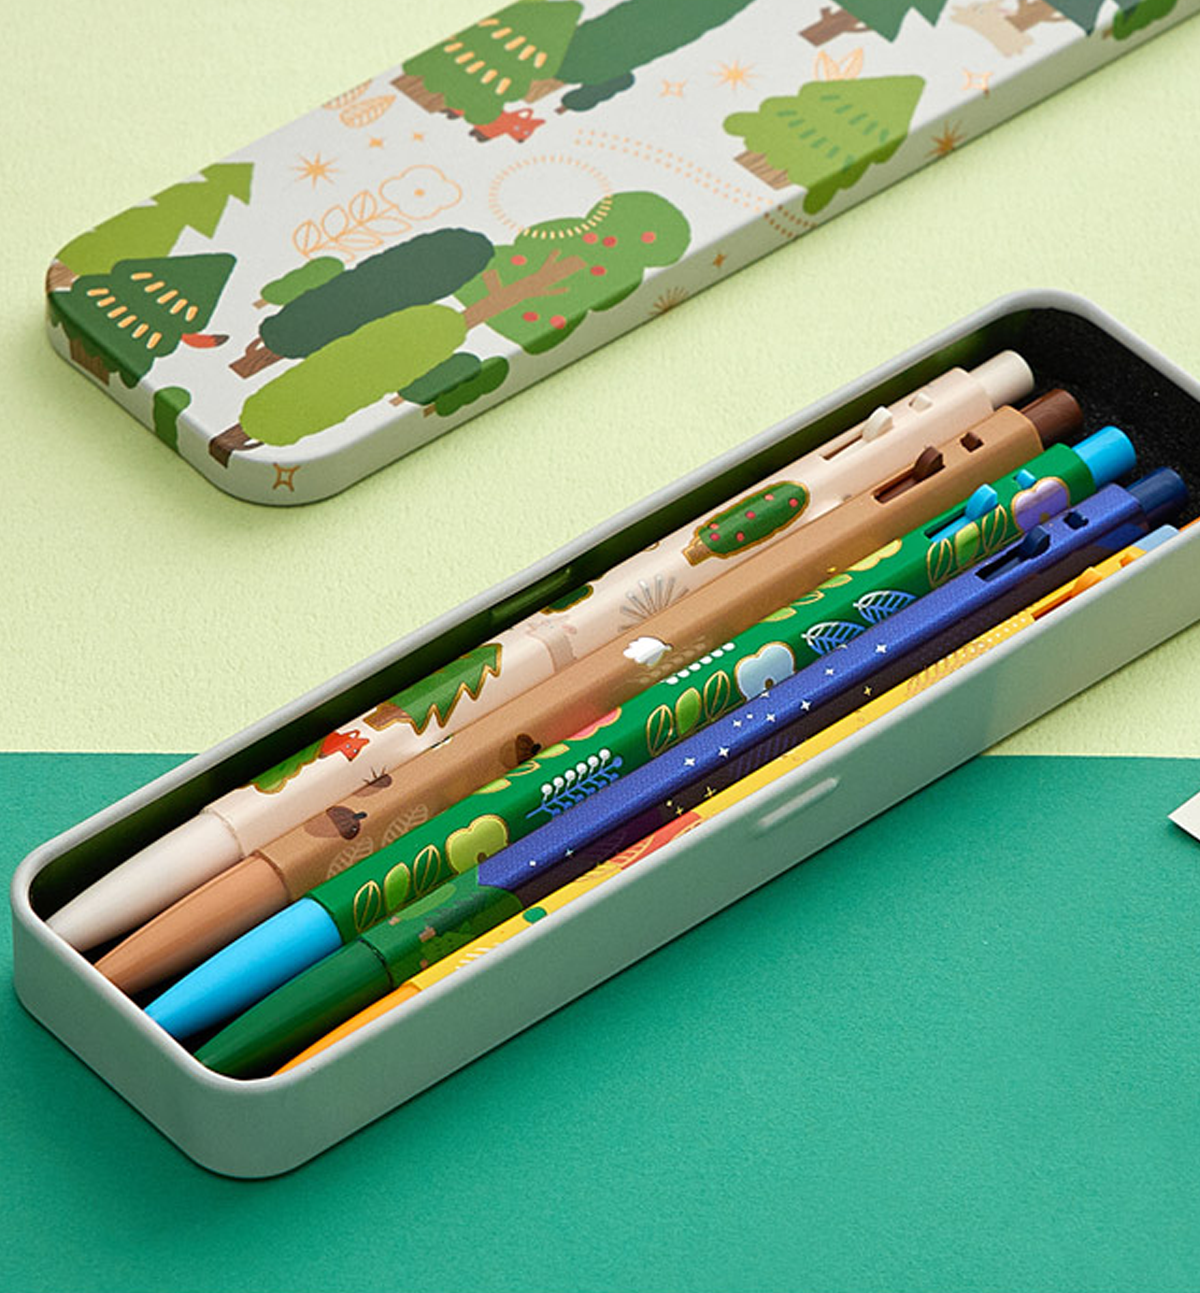 153 Forest 5 Pens [Limited Edition]